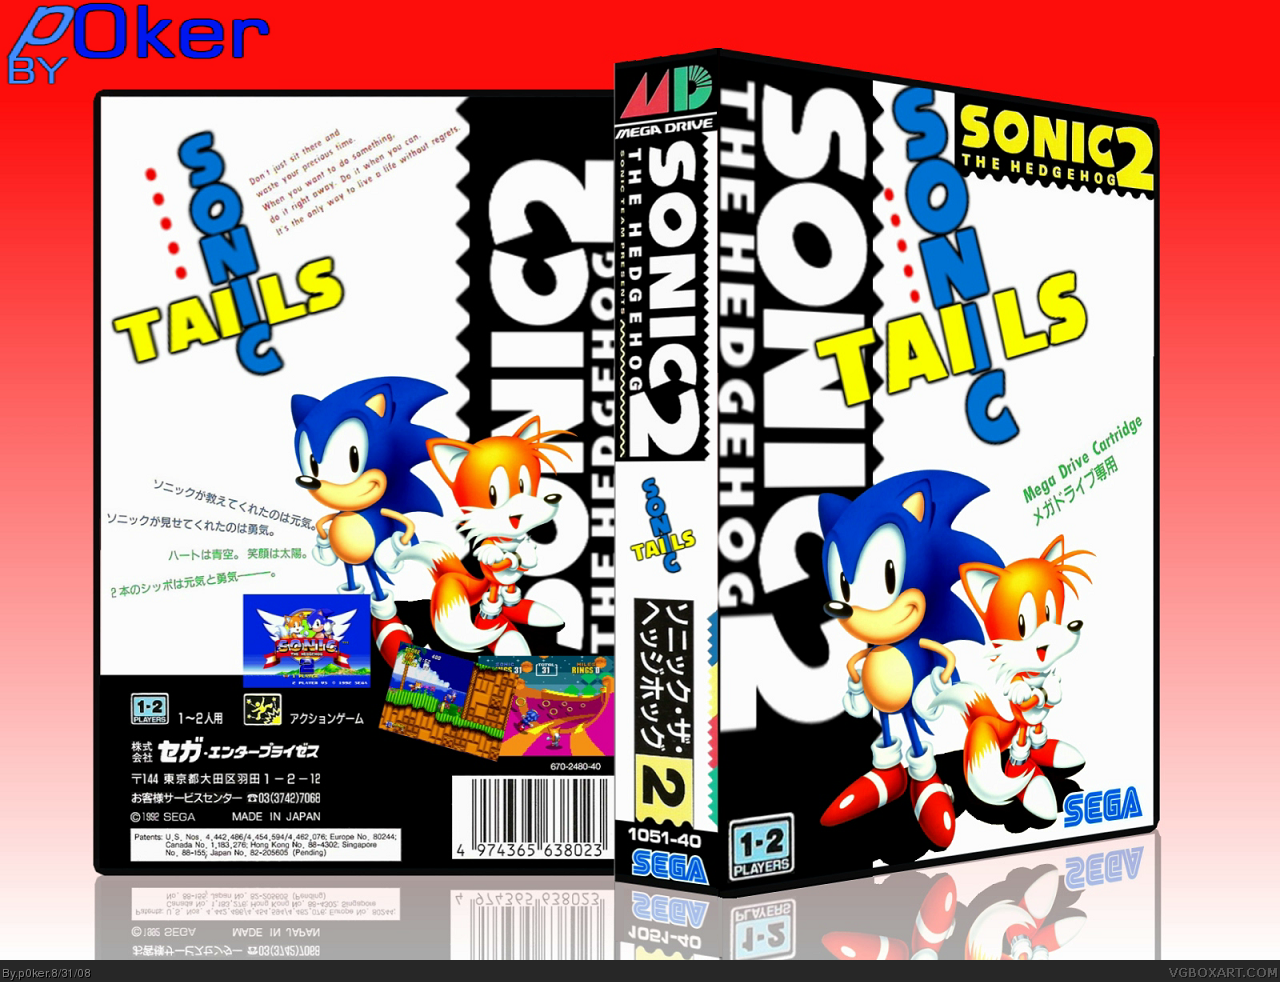 Sonic the Hedgehog 2 box cover